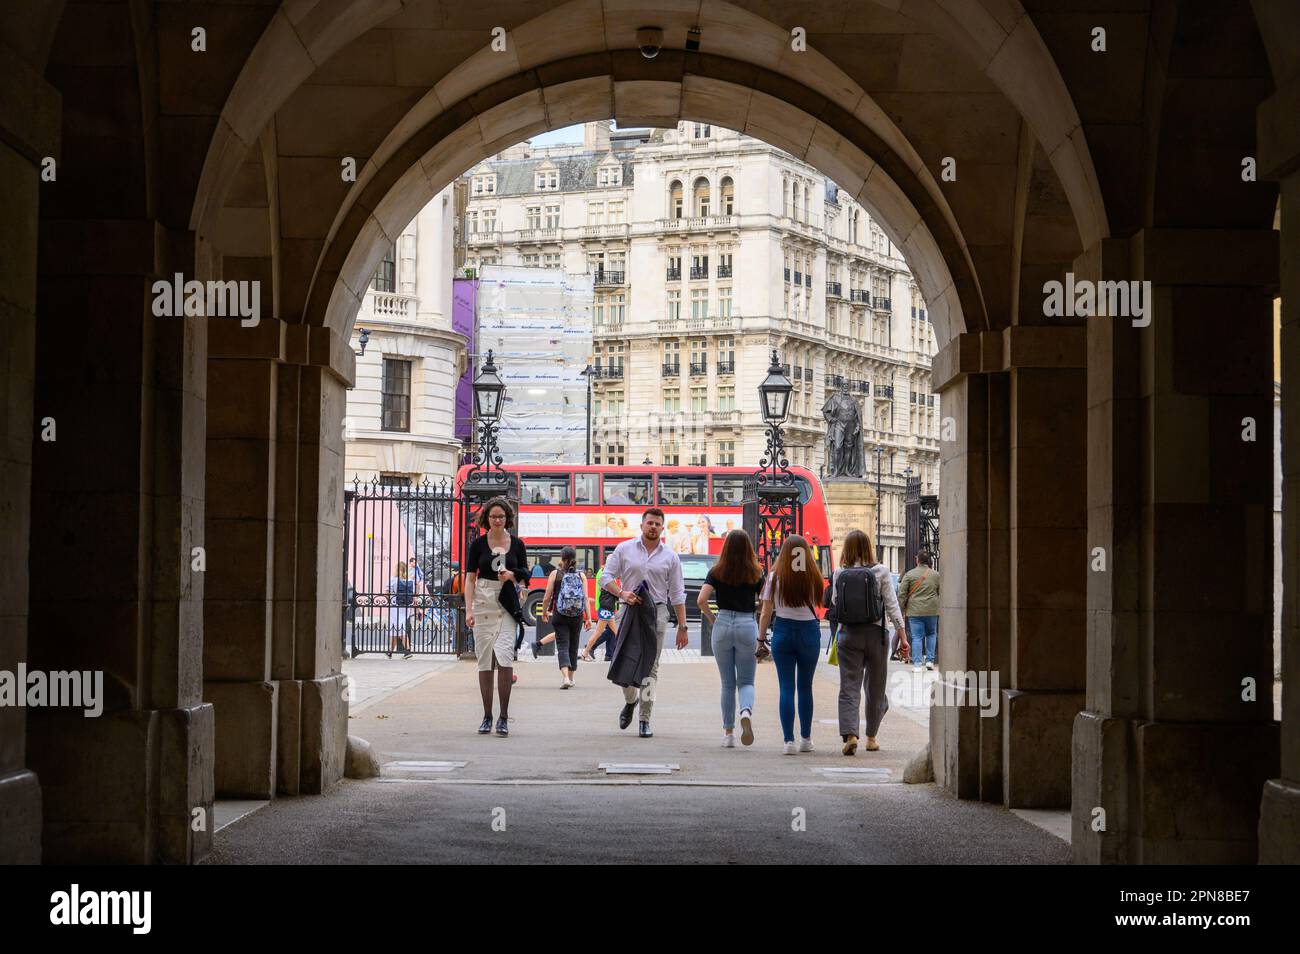 LONDON - May 18, 2022: A busy London scene as people walk through the entrance arch to Horse Guards Parade, with the iconic red double-decker bus in t Stock Photo